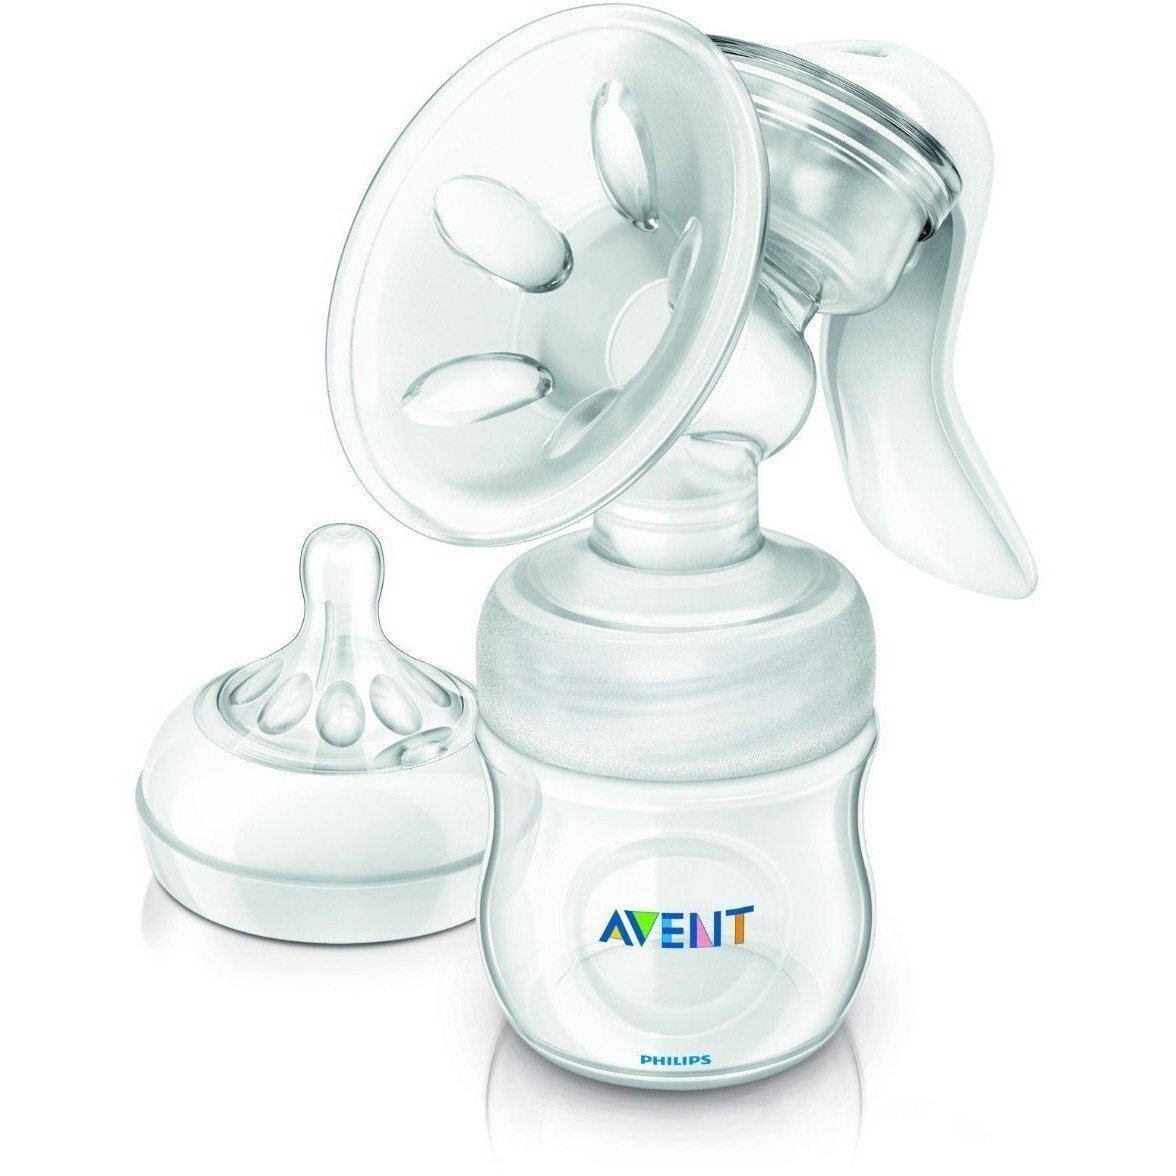 Philips AVENT Comfort - Bomba Extratora Manual Anne Claire Baby Store 